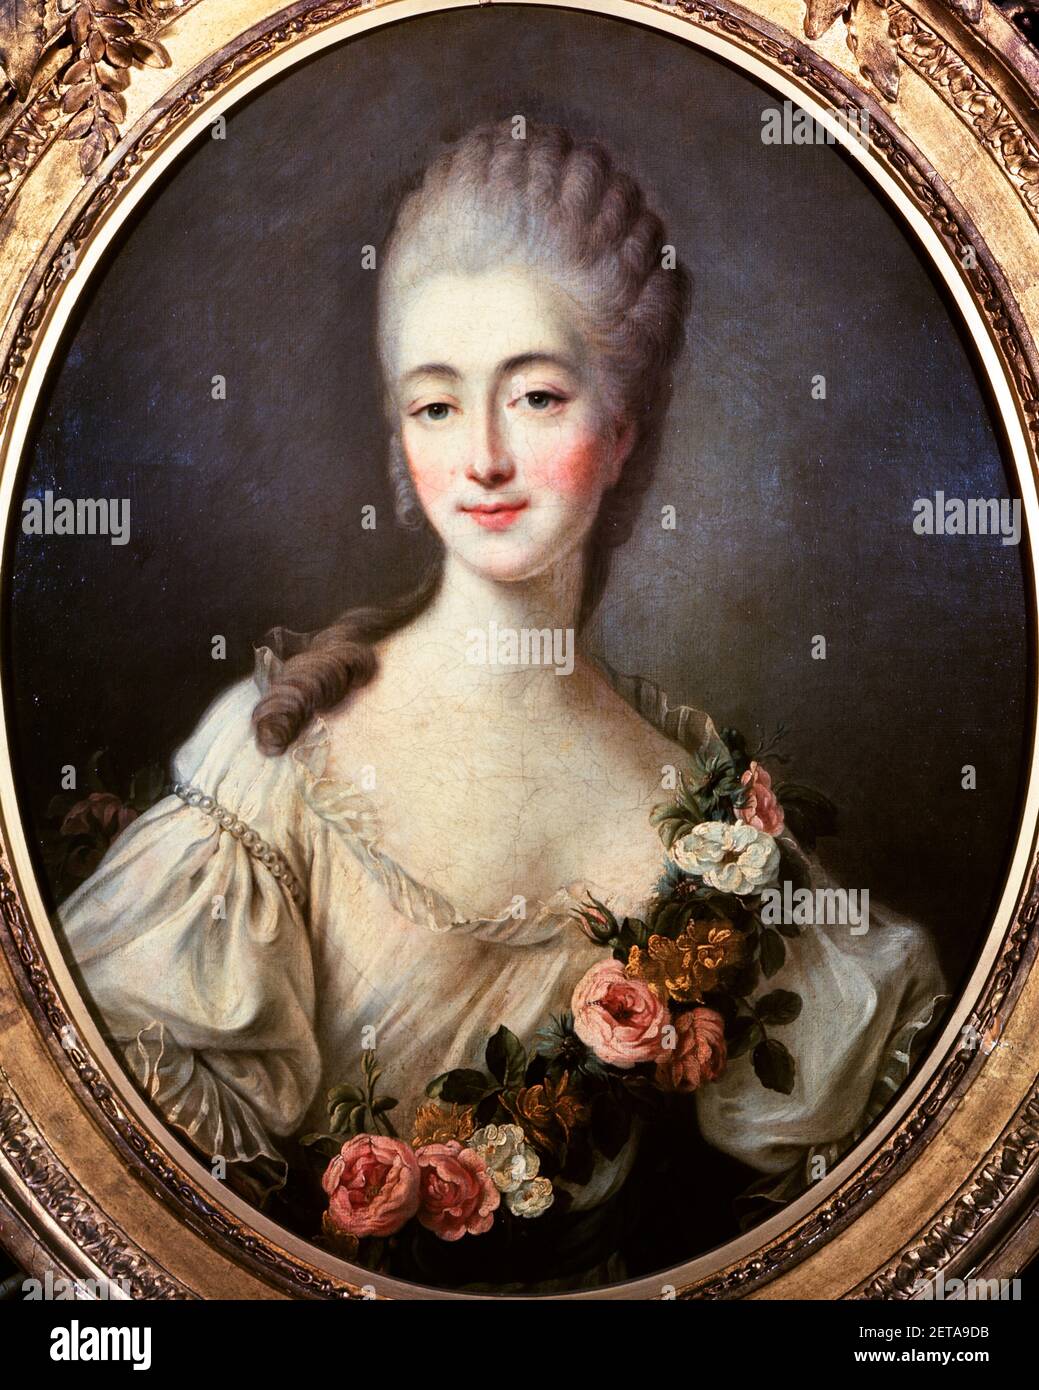 1700s 1769 PORTRAIT OF MADAME DUBARRY AGE 26 BY FRANCOIS HUBERT DROUAIX 18TH CENTURY FASHION MISTRESS OF LOUIS XV  - ka9260 SPL001 HARS BEHEADED FASHIONS LOVER MADAME YOUNG ADULT WOMAN 1700s 18TH CENTURY CAUCASIAN ETHNICITY COURTESAN FRANCOIS GUILLOTINE LAST LOUIS XV MISTRESS OLD FASHIONED REIGN OF TERROR Stock Photo